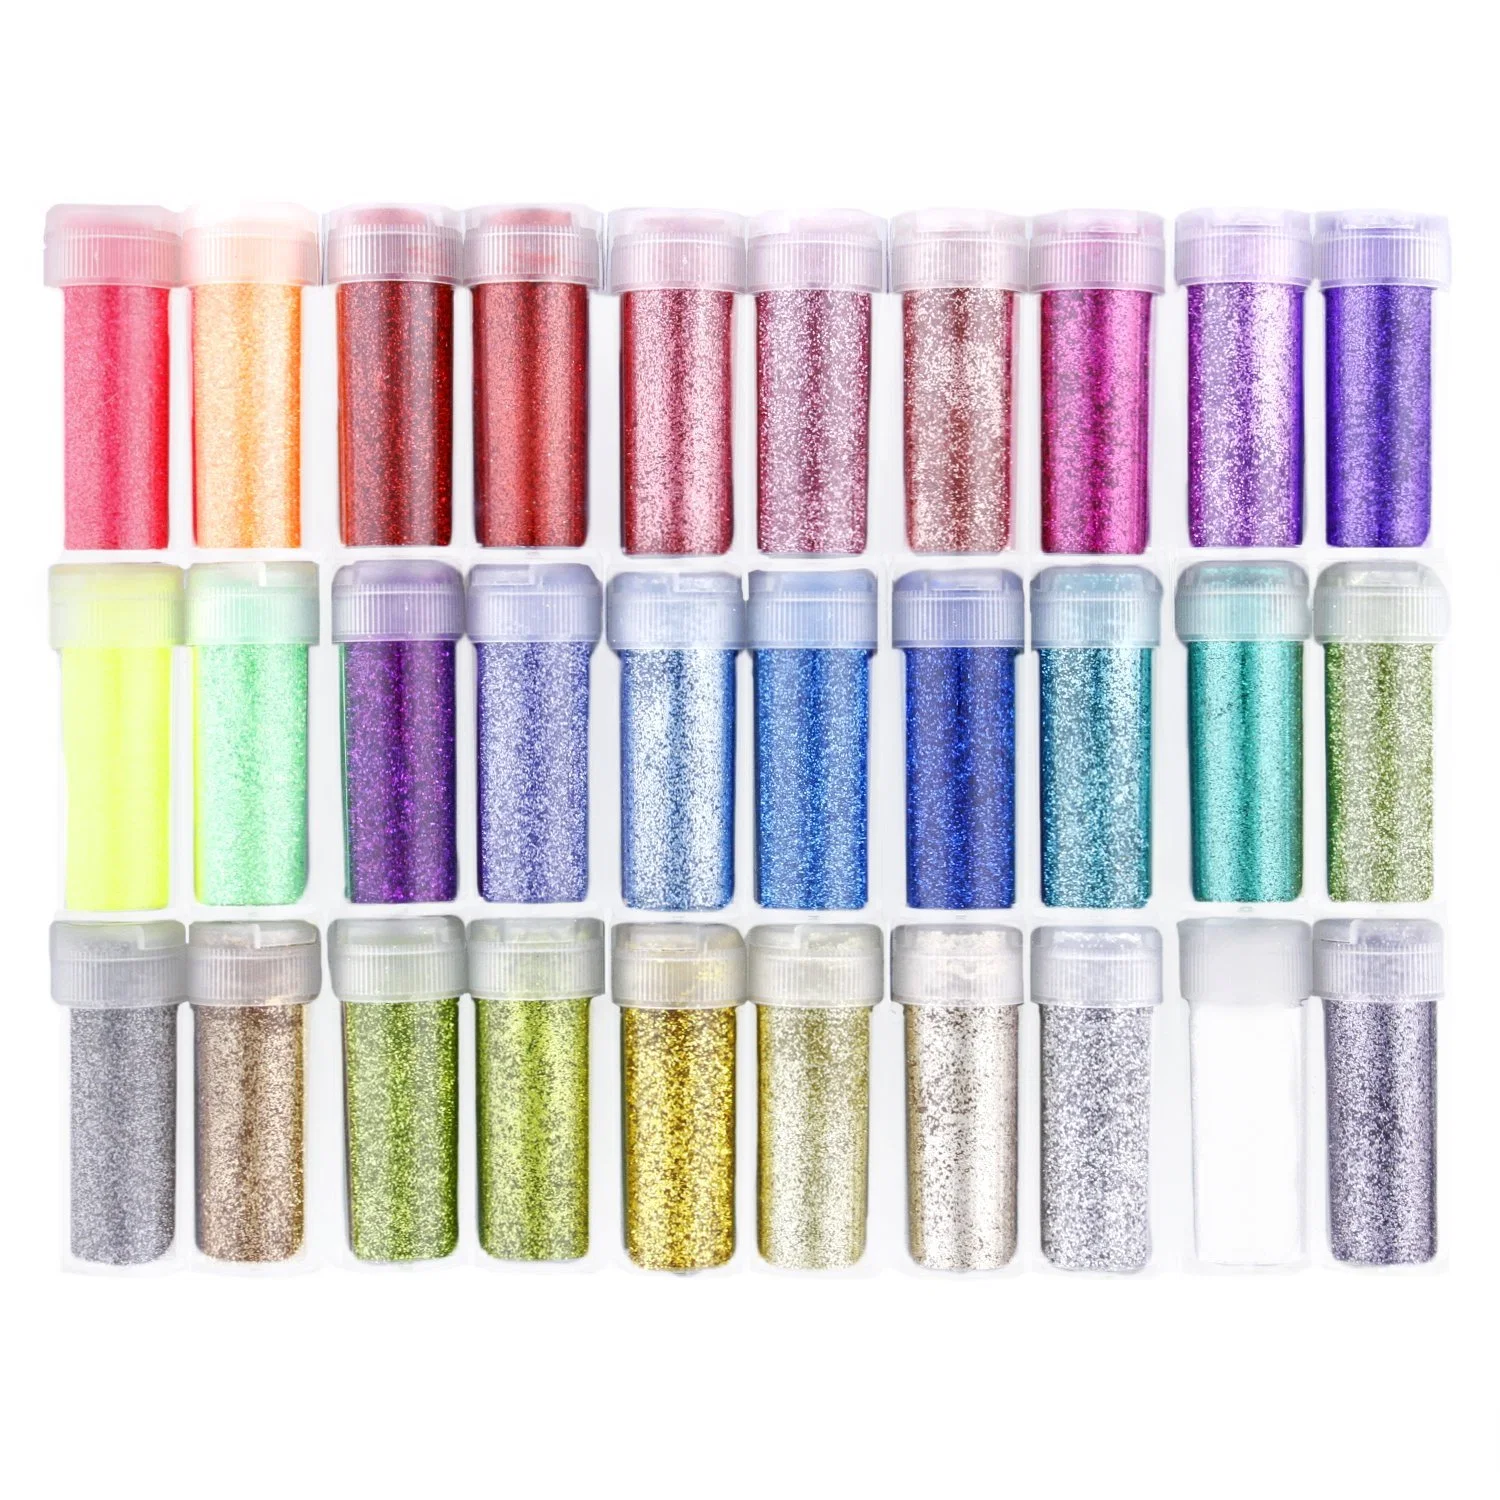 Arts Crafts Glitter Powder Shakers Assorted Colors